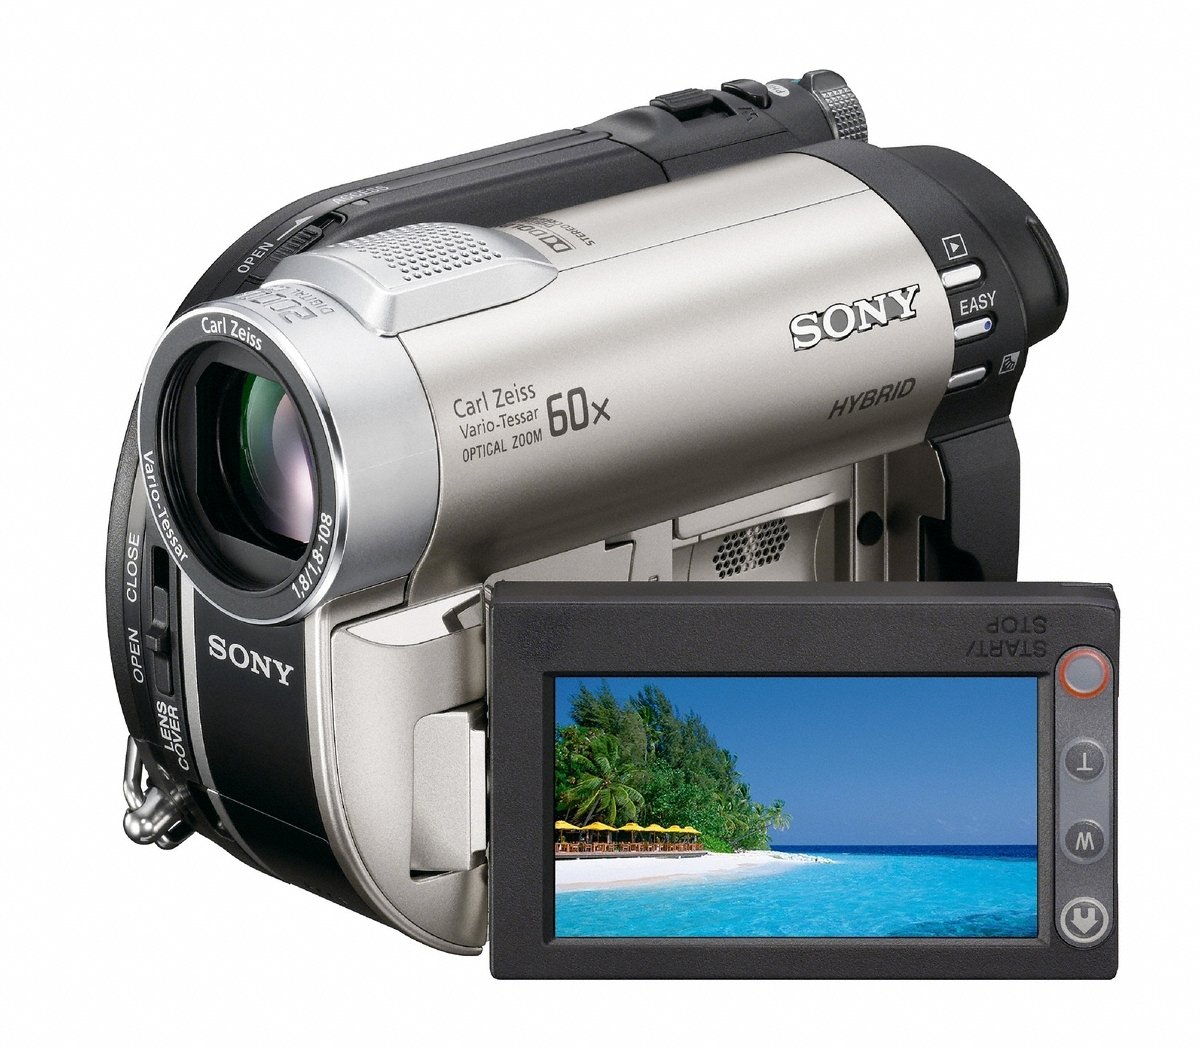 Sony DCR-DVD650 DVD Camcorder (Discontinued by Manufacturer)